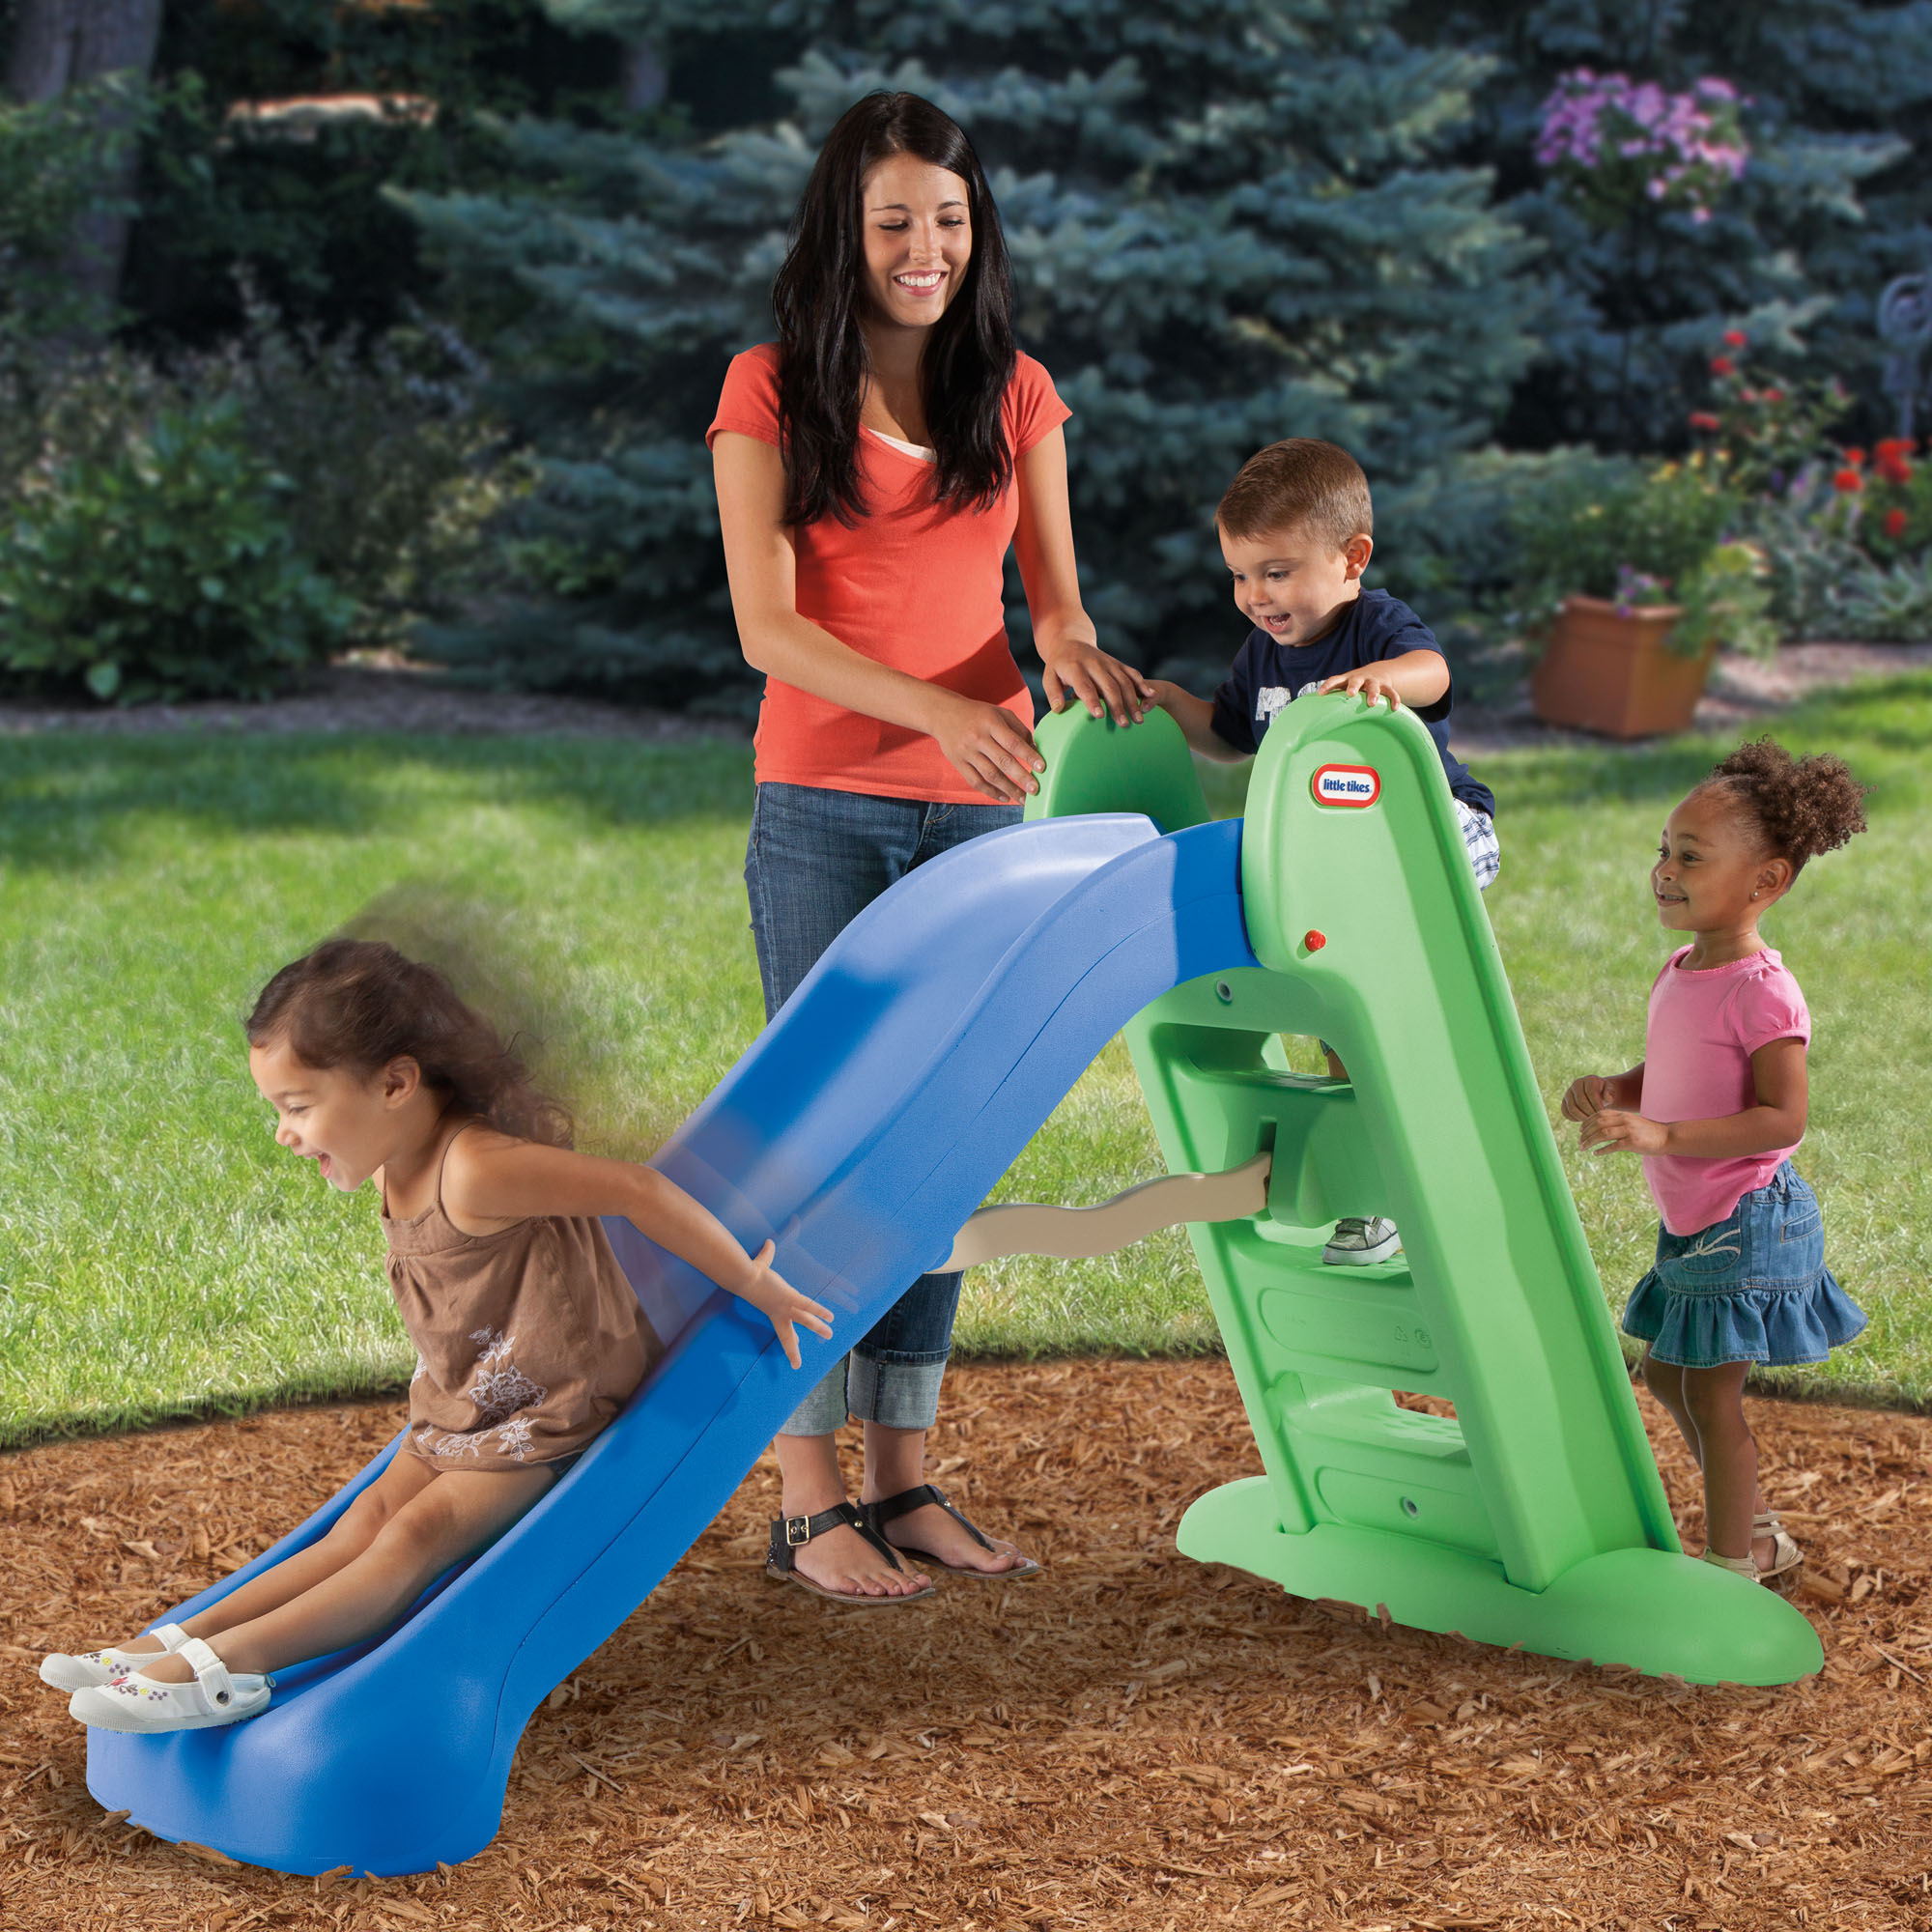 Little Tikes Easy Store Large Playground Slide with Folding for Easy Storage, Outdoor Indoor Active Play, Blue and Green- For Kids Toddlers Boys Girls Ages 2 to 6 Year old - image 4 of 5